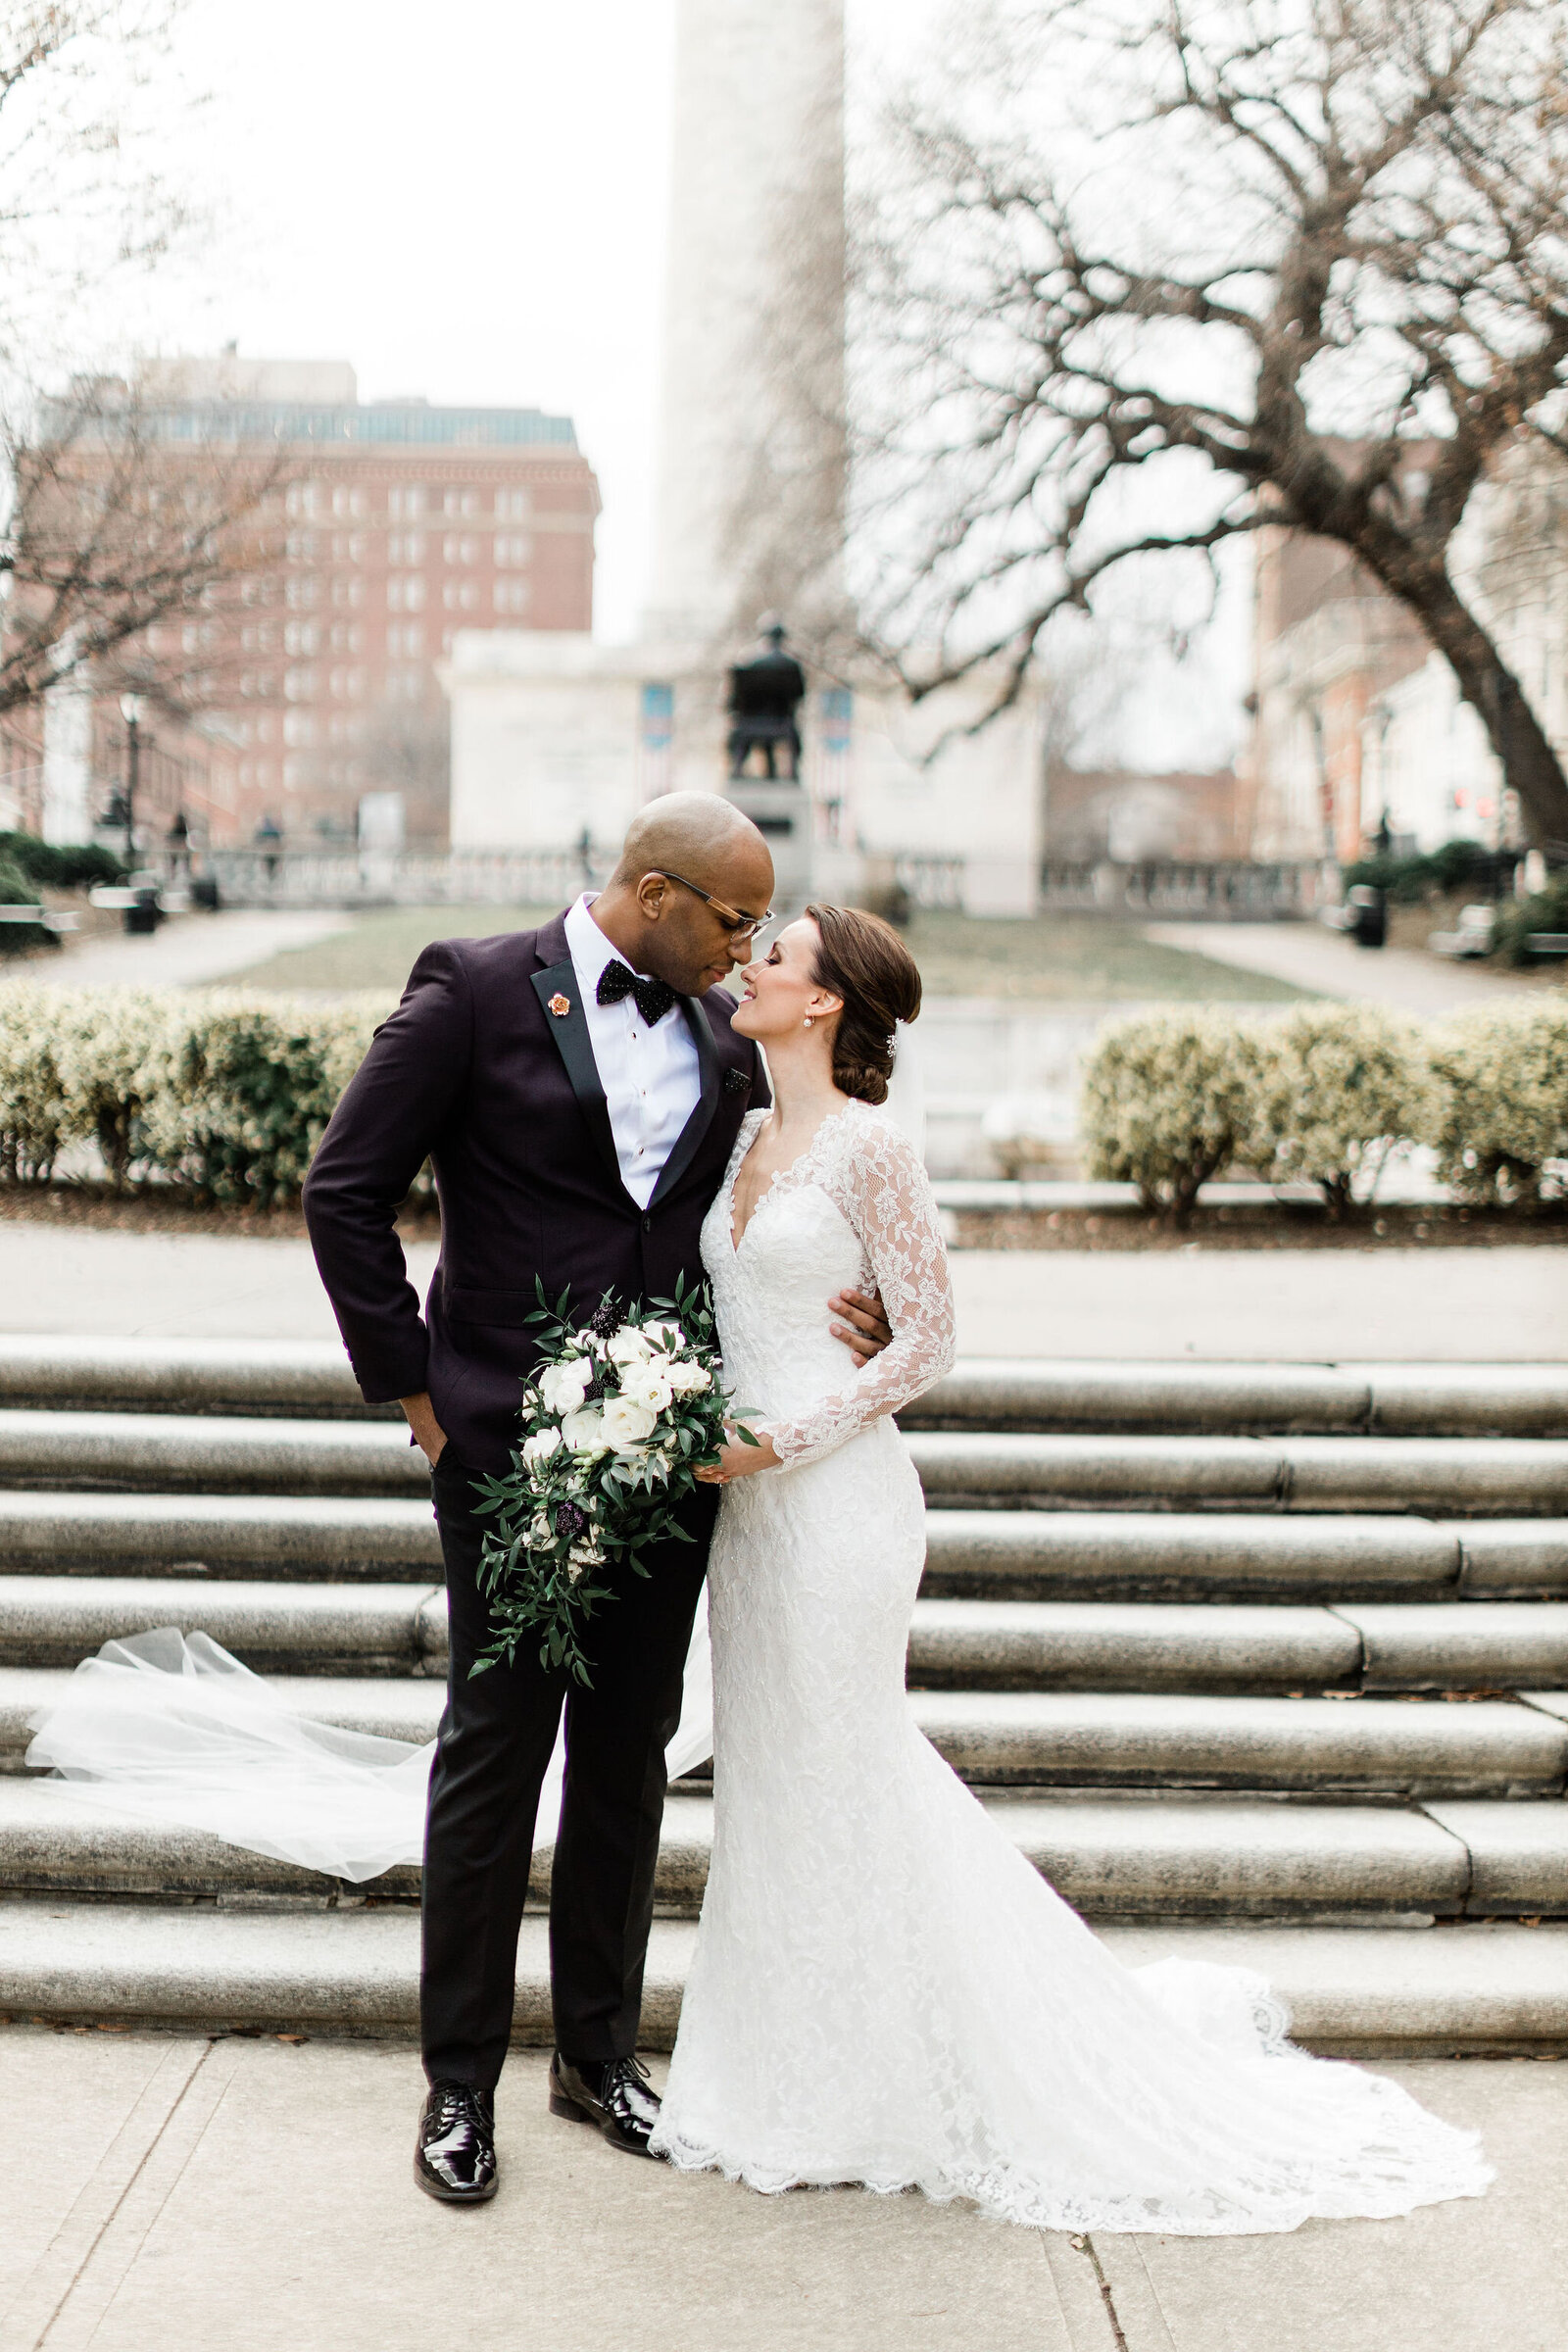 Gorgeous Wedding Day Formal Photos | The Peabody Library Baltimore MD | The Axtells Photo and Film